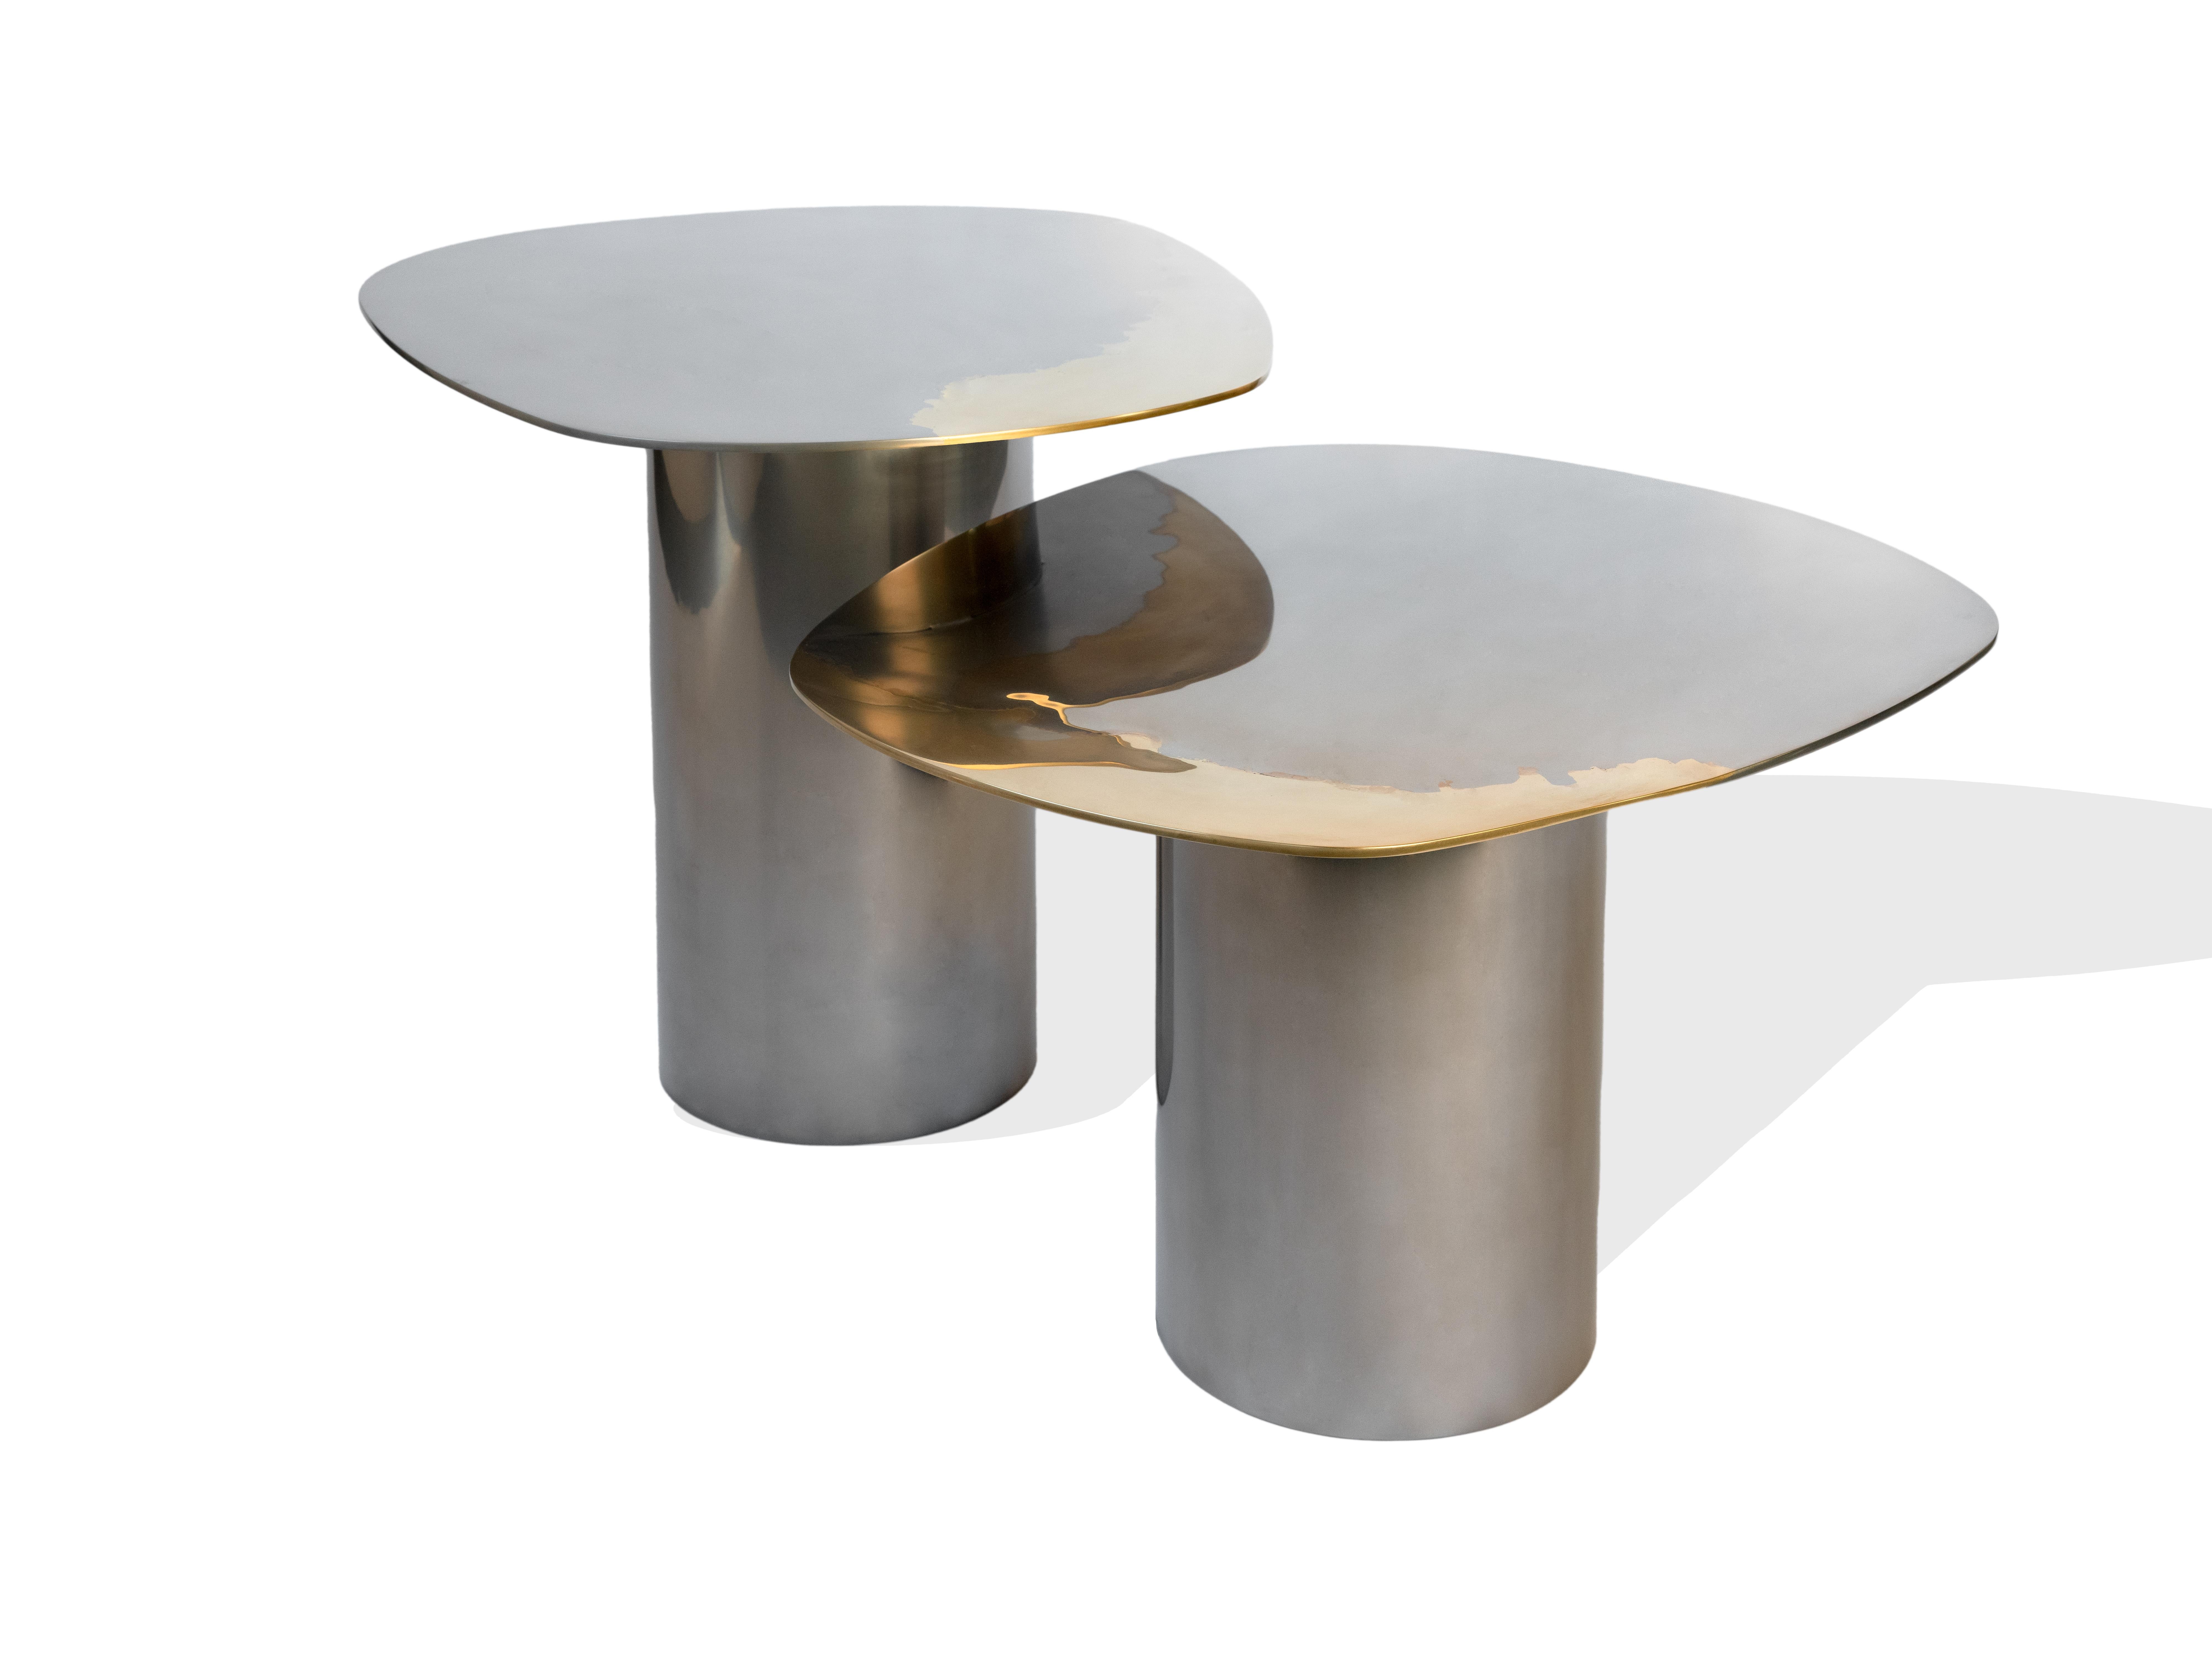 A set of Custom nesting tables as part of the Transition collection, featuring unique, artistic mirror polished tabletops, crafted from brass and stainless steel on tubular bases. 

Studio Warm has developed a distinctive, high-end, artistic finish